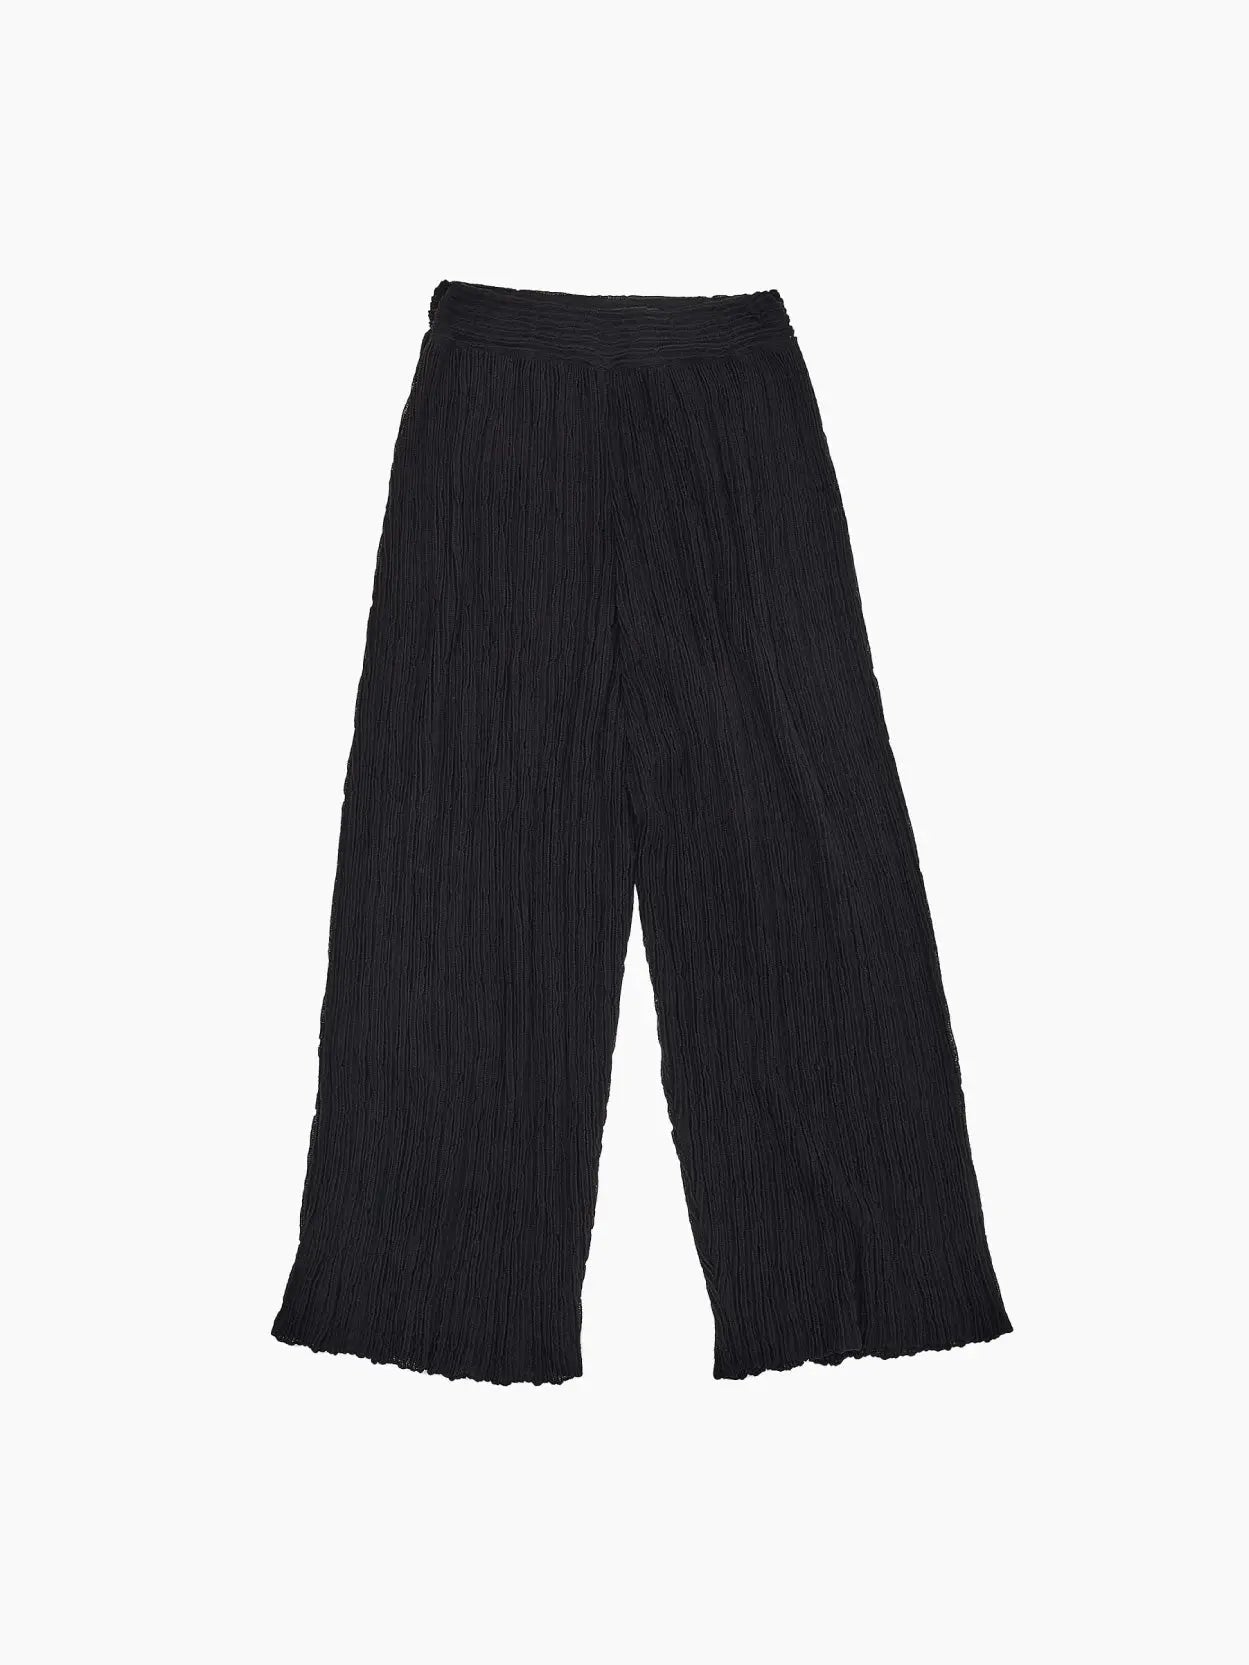 A pair of black, wide-leg pants featuring a crinkled texture and an elastic waistband, laid flat on a white background, available exclusively at Bassalstore in Barcelona. The product name is Hasami Pants Black by the brand Rus.